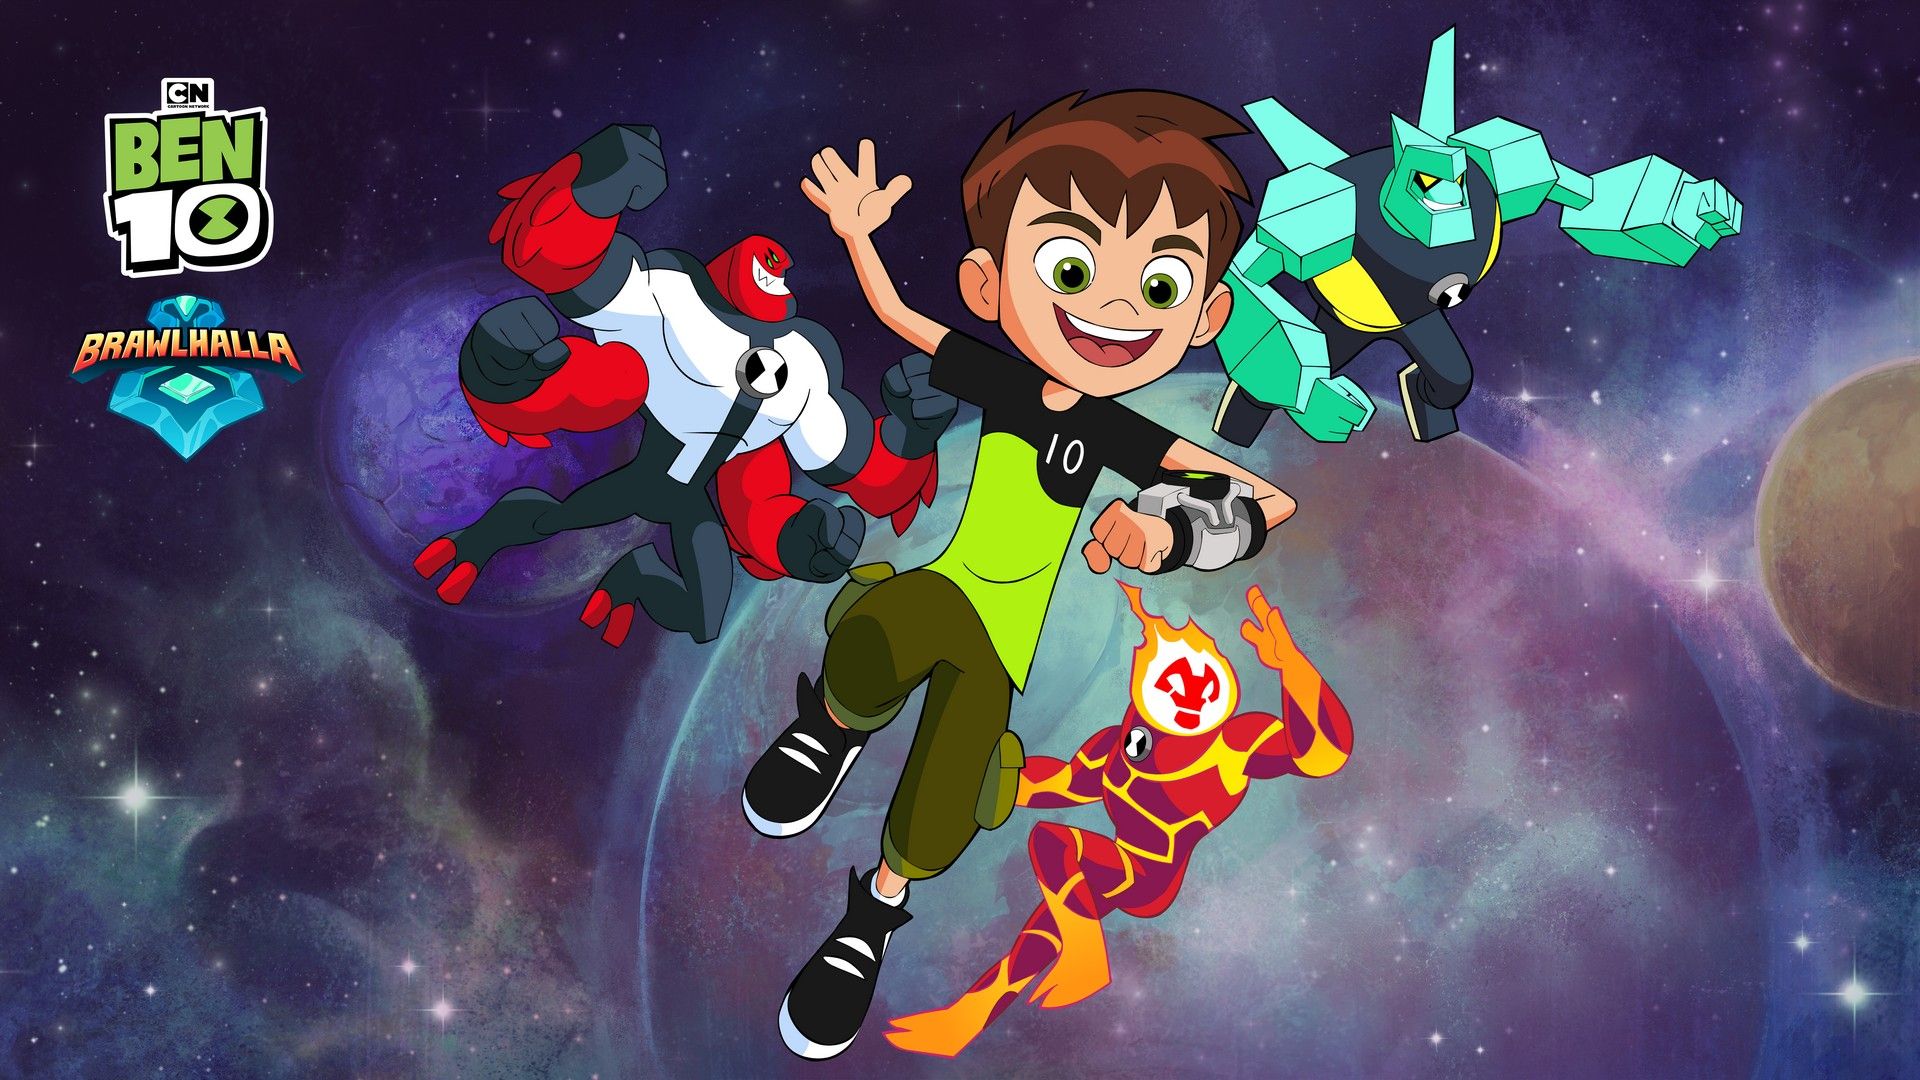 Cartoon Network's Ben 10 Crash Lands into BRAWLHALLA as Epic Crossovers